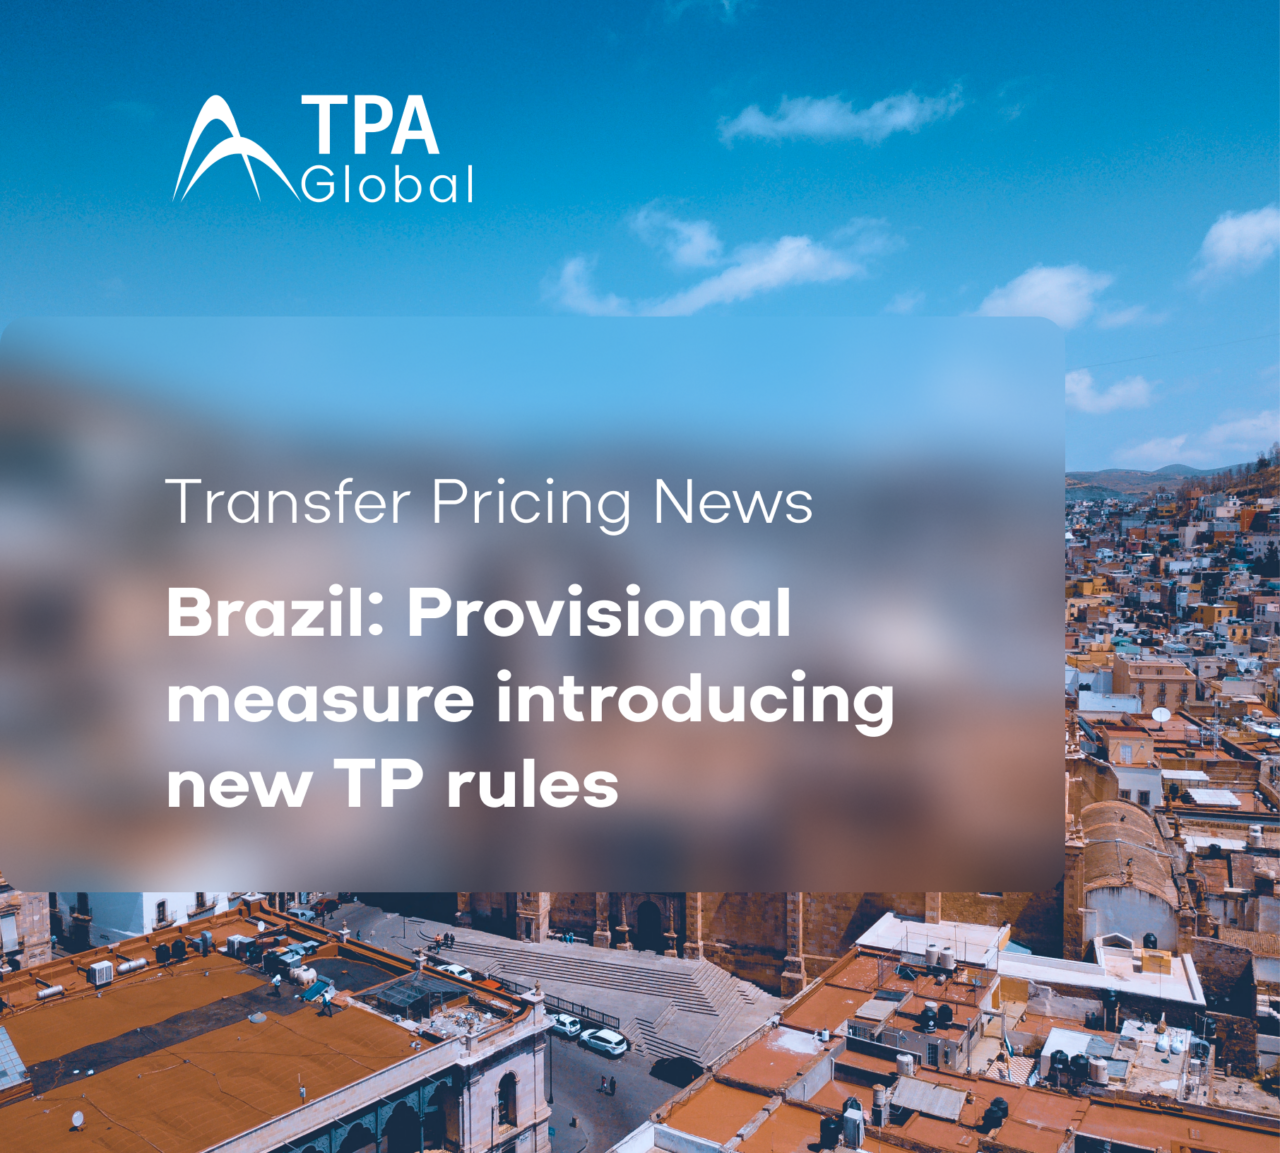 Brazil: Provisional measure introducing new TP rules